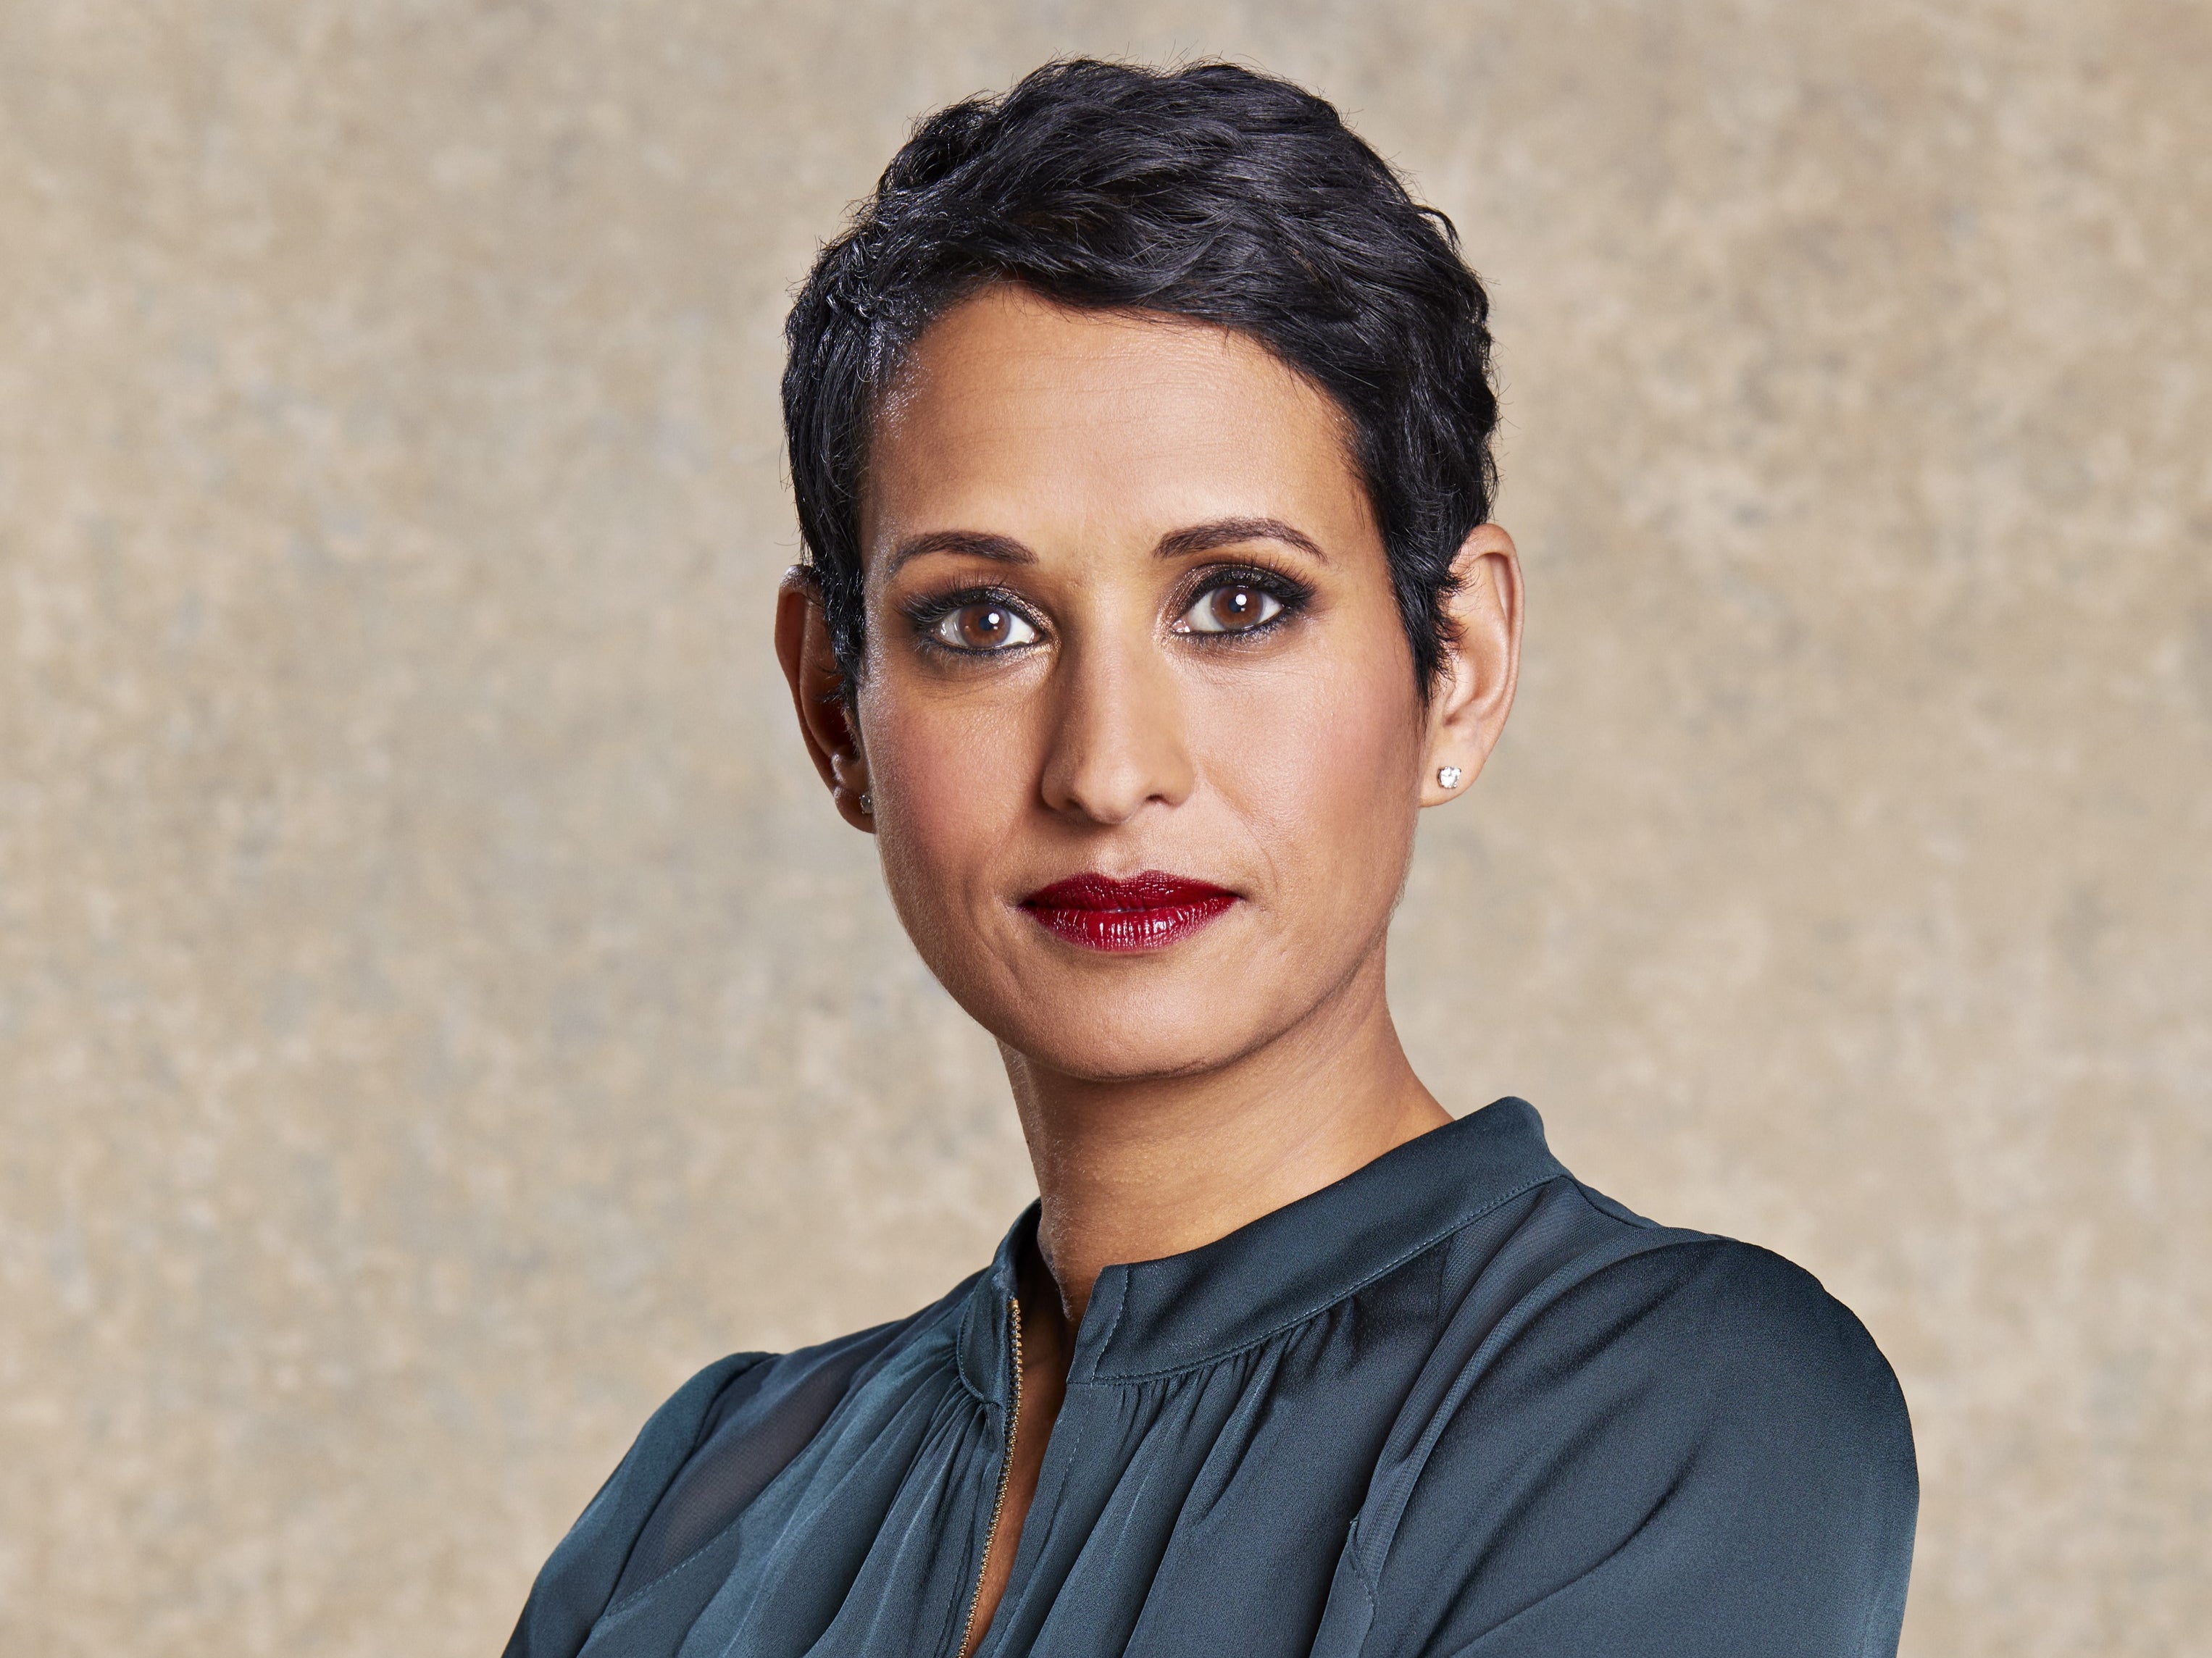 Naga Munchetty hads lived ‘every day on painkillers’